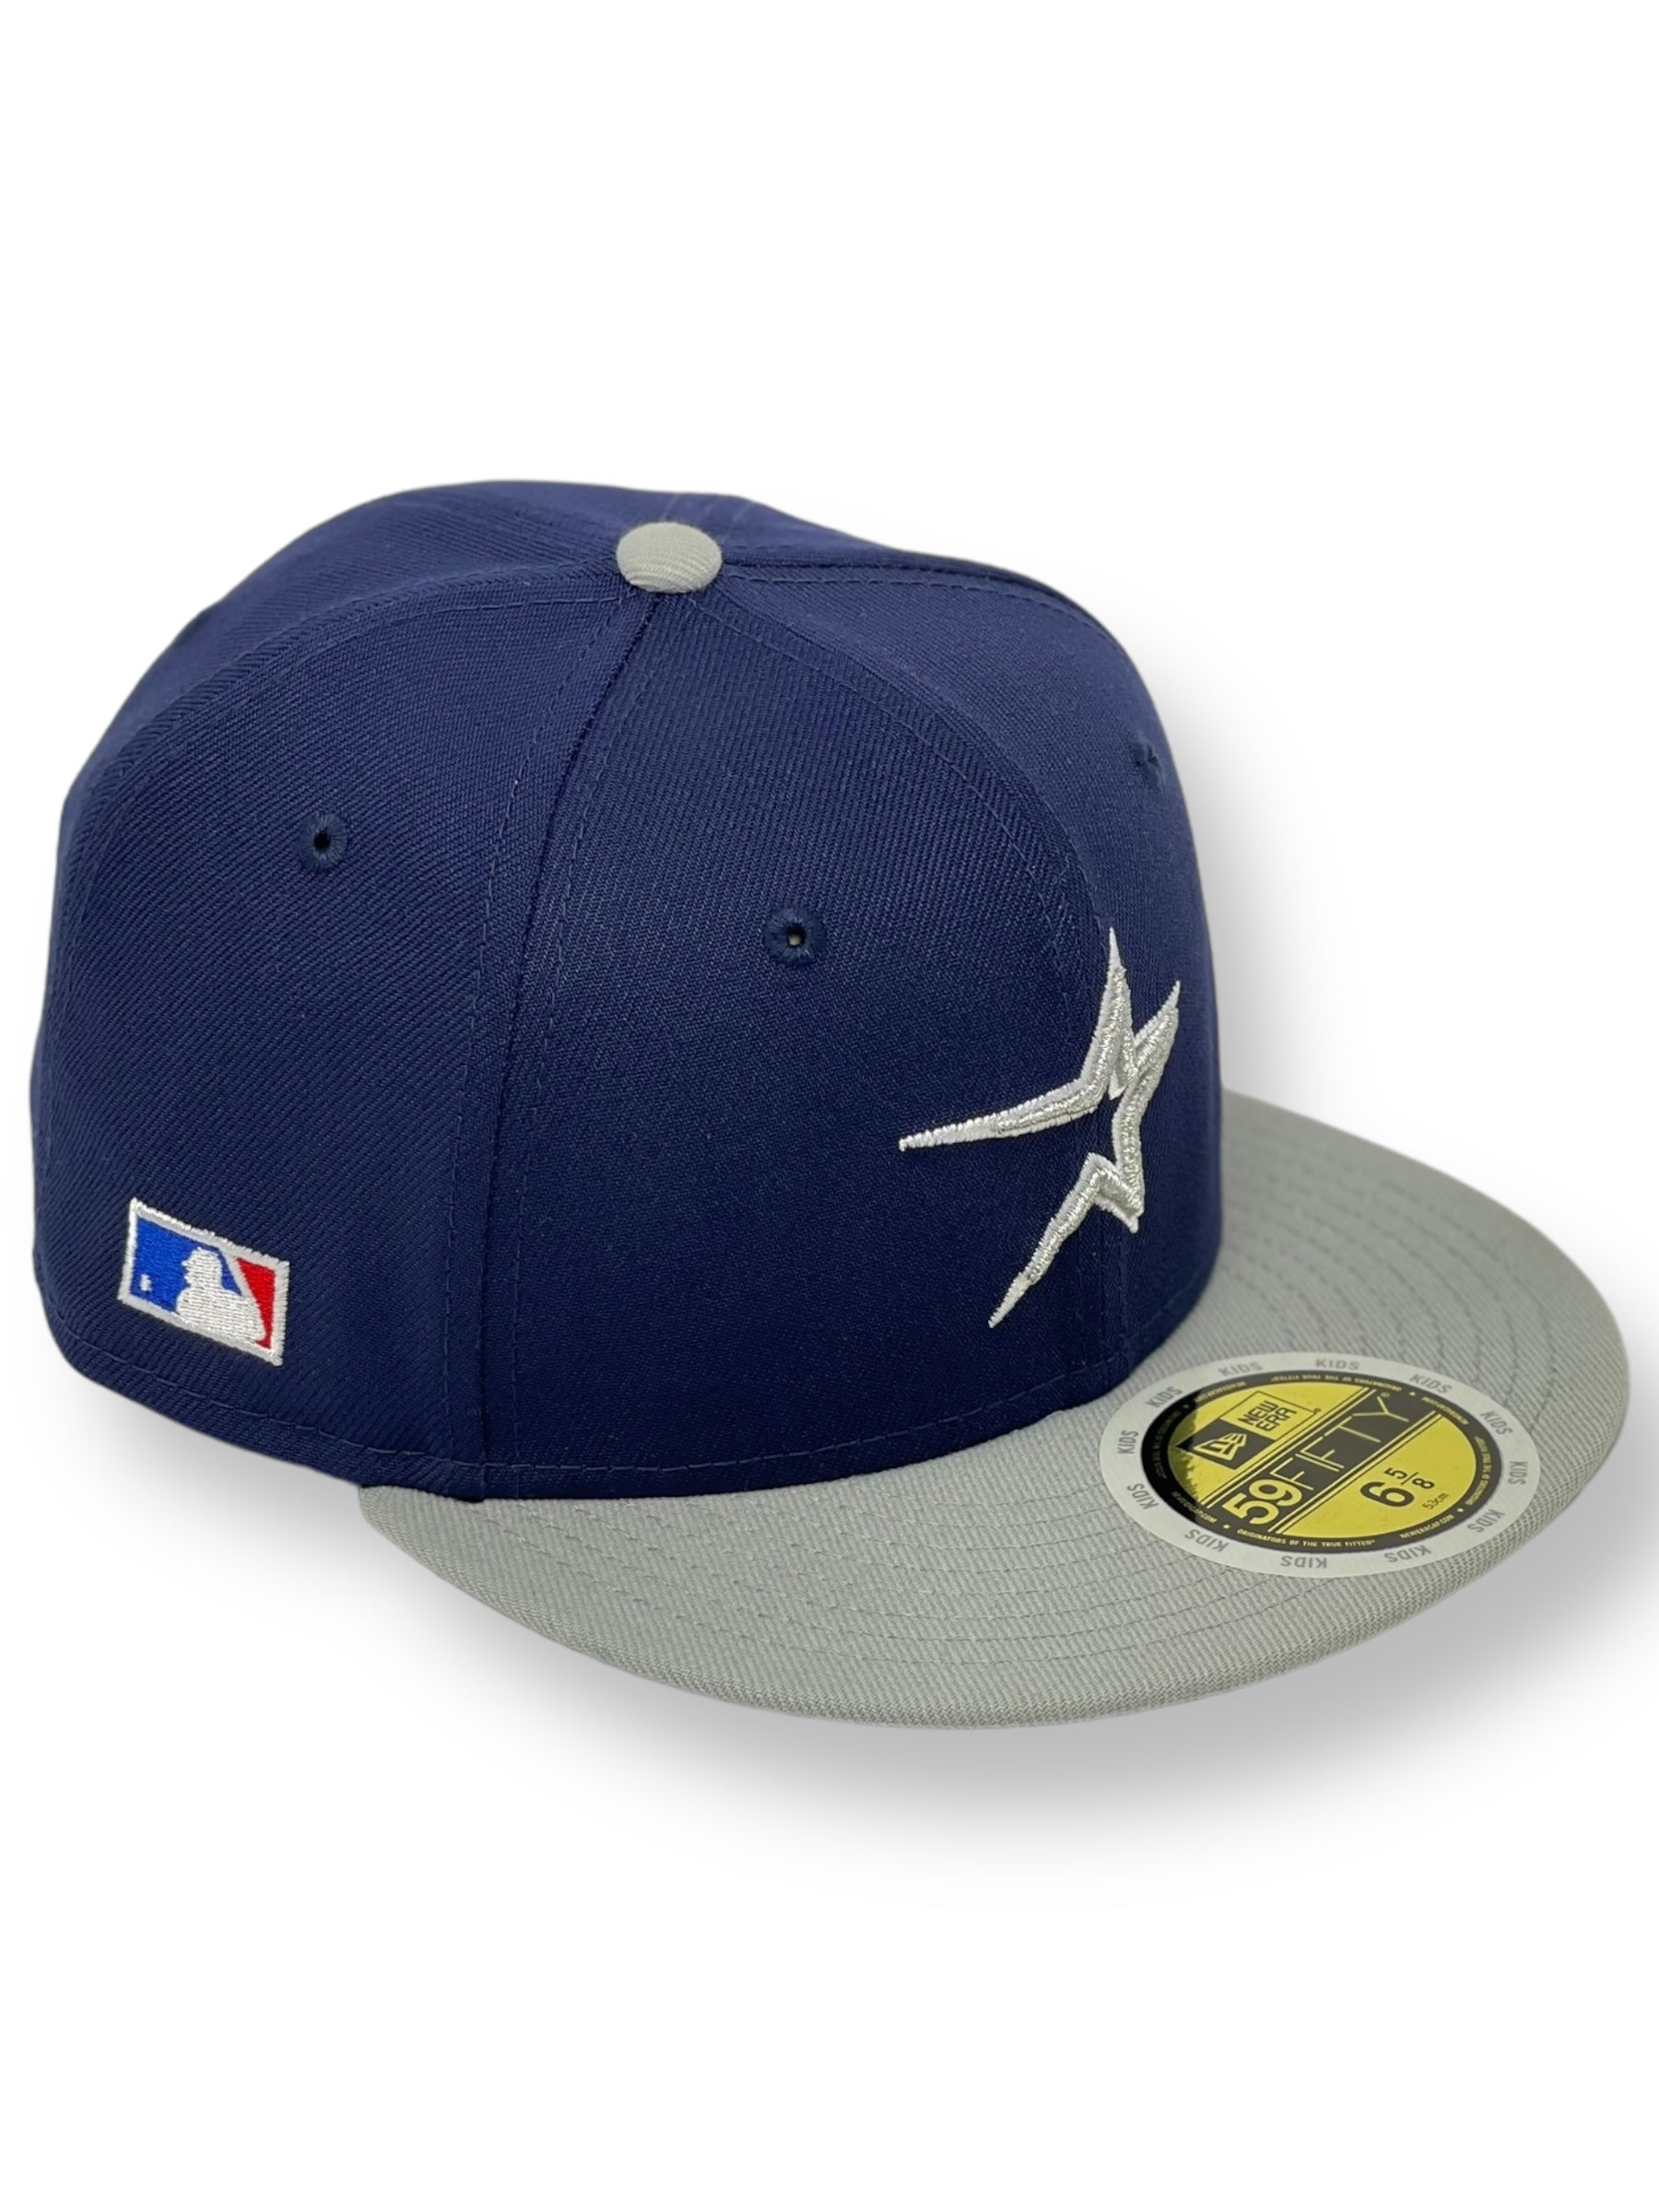 "KIDS" HOUSTON ASTROS (LT-NAVY) NEW ERA 59FIFTY FITTED